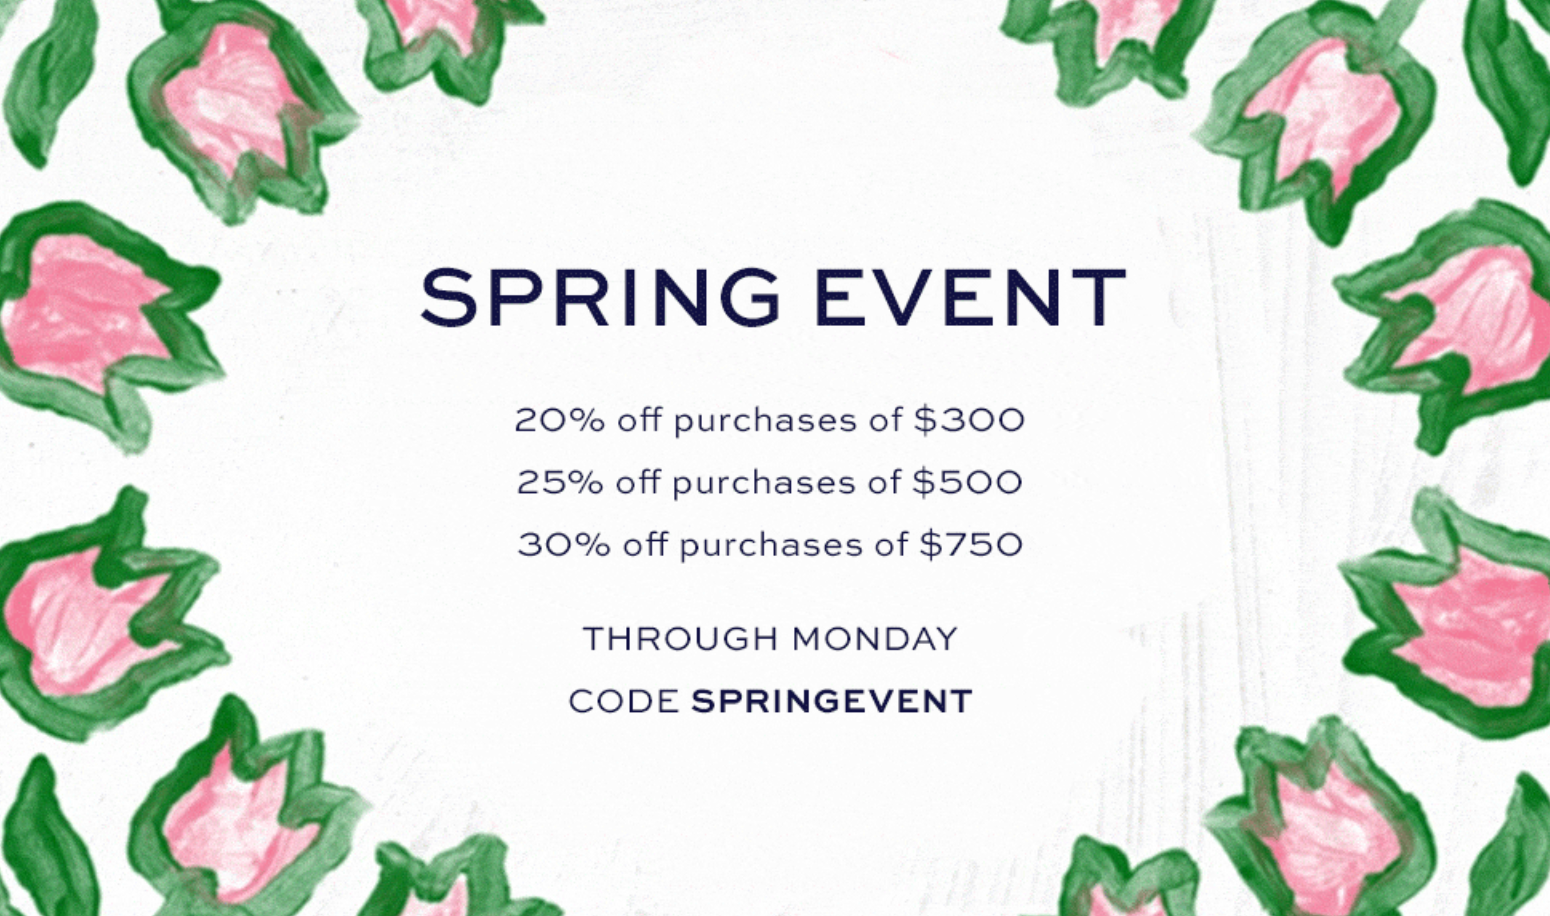 tory burch spring event sale | A Southern Drawl